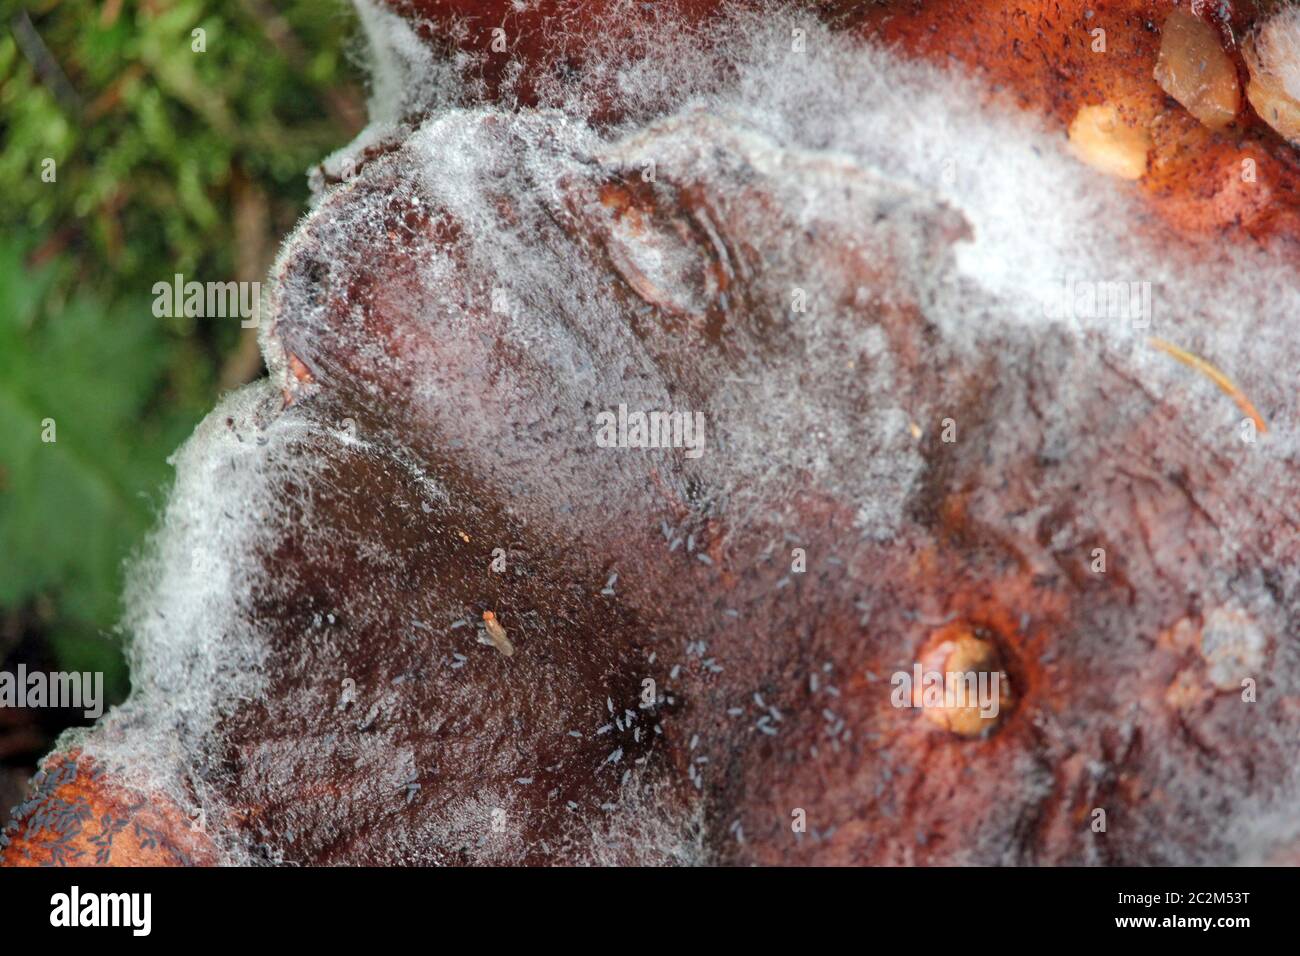 fungus with mold Stock Photo